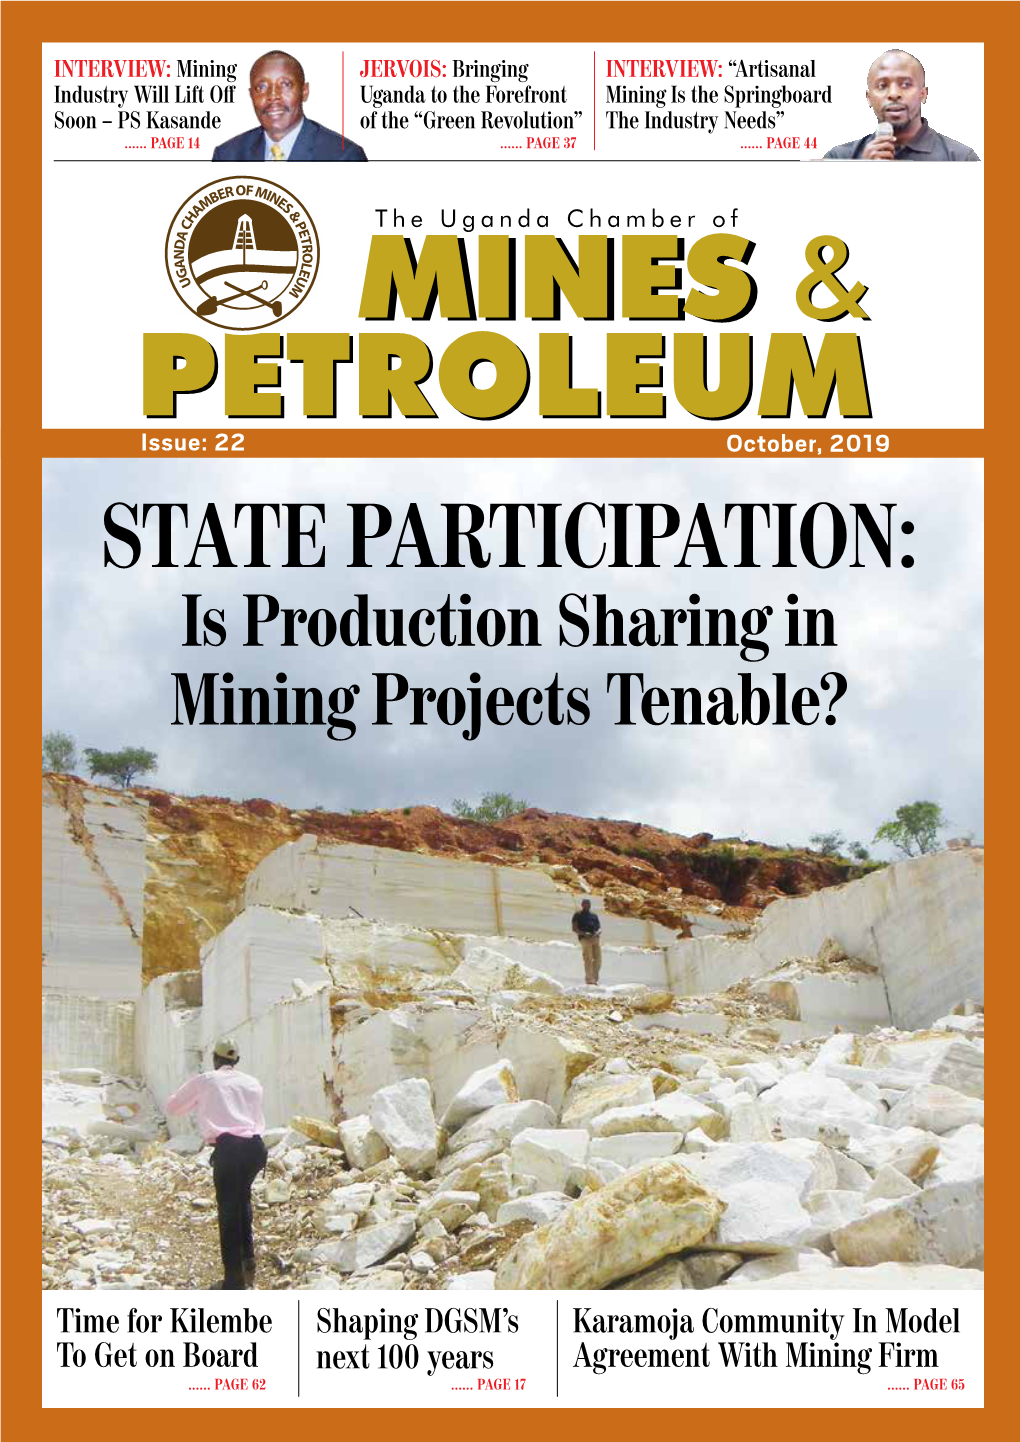 State Participation: Is Production Sharing in Mining Projects Tenable?